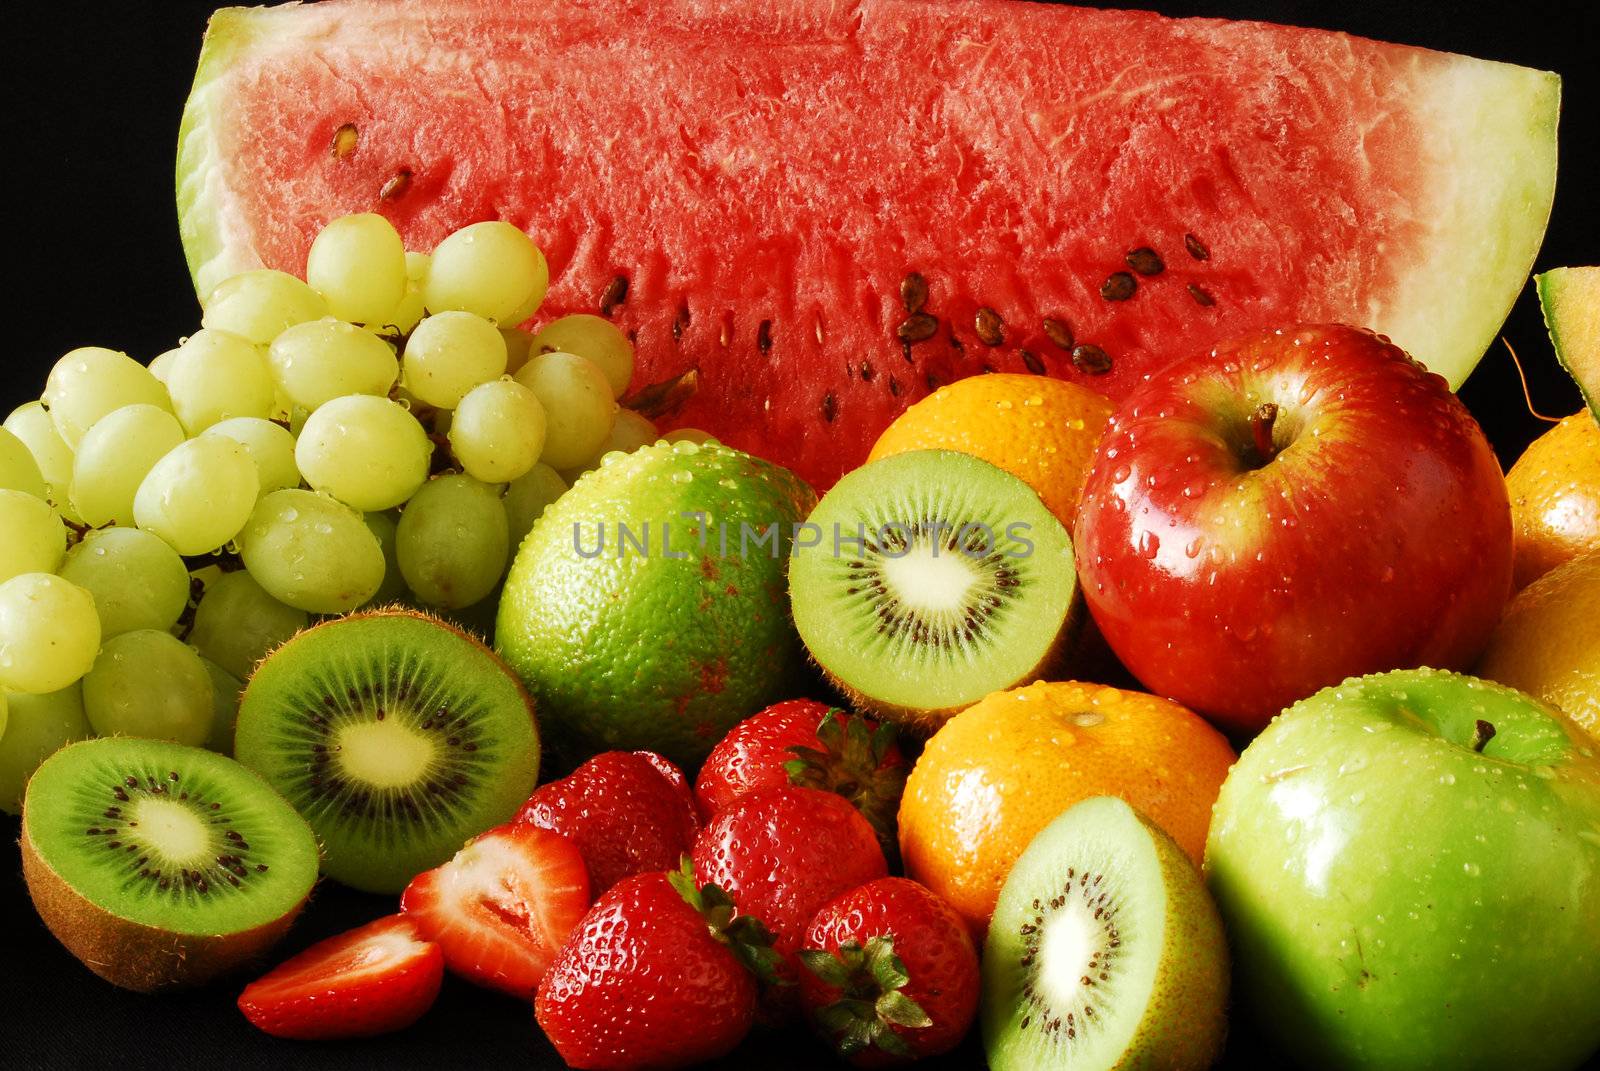 Colorful fresh group of fruits for a balanced diet. Black background. Look at my gallery for more fresh fruits and vegetables.